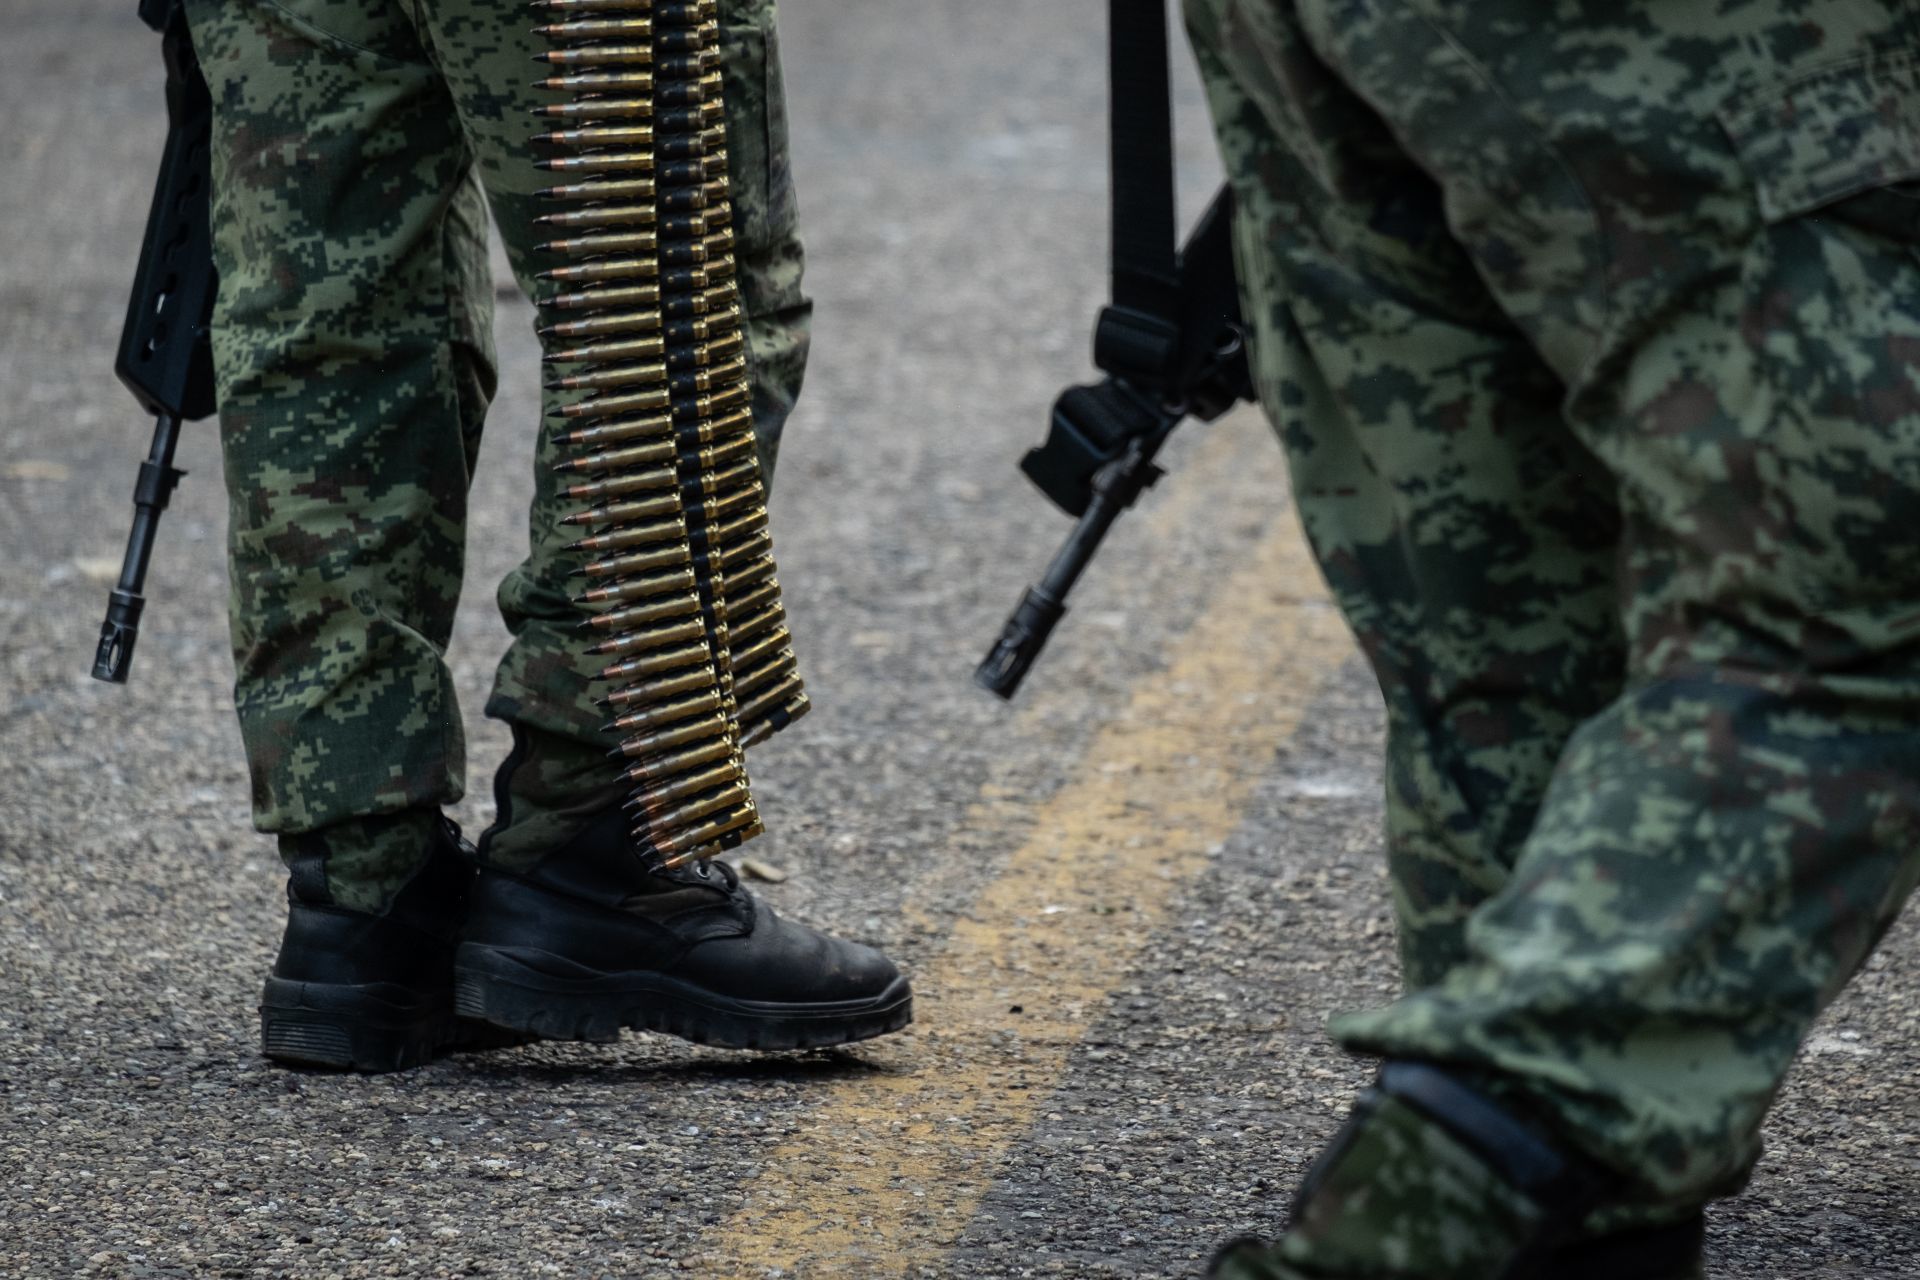 7 people die after confrontation between armed group and Army in Michoacán